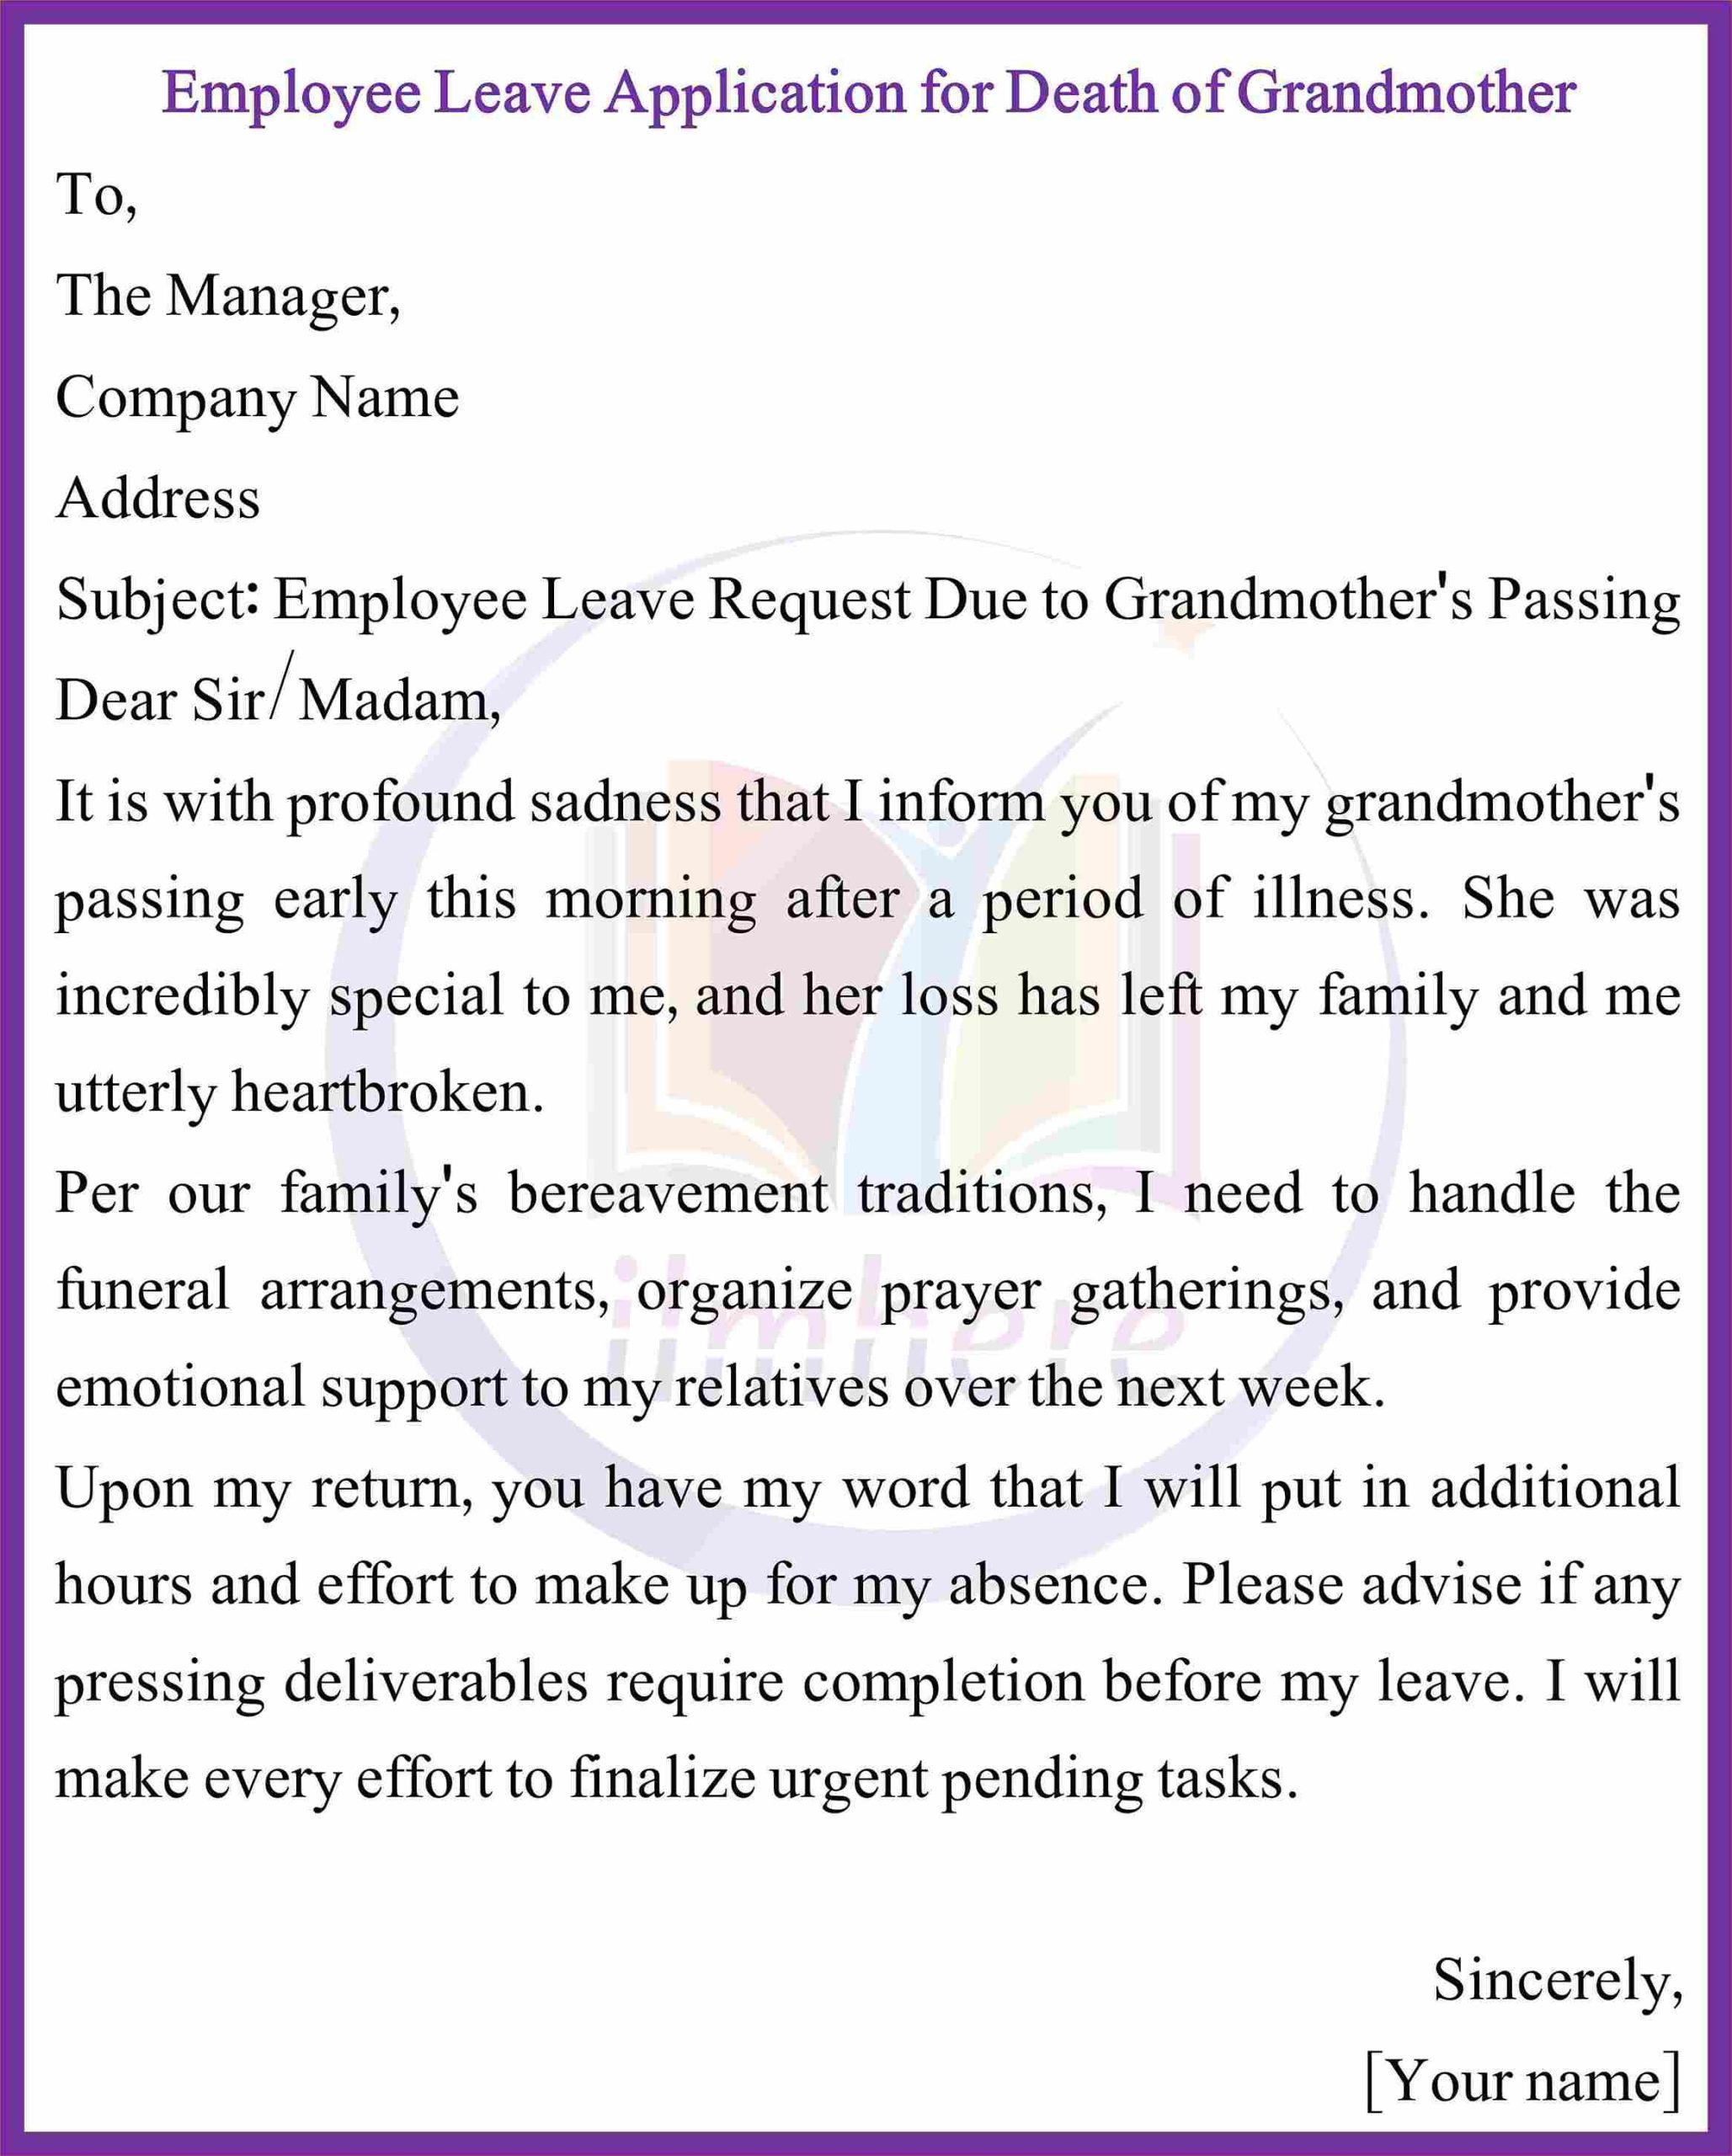 10,Employee Leave Application for Death of Grandmother